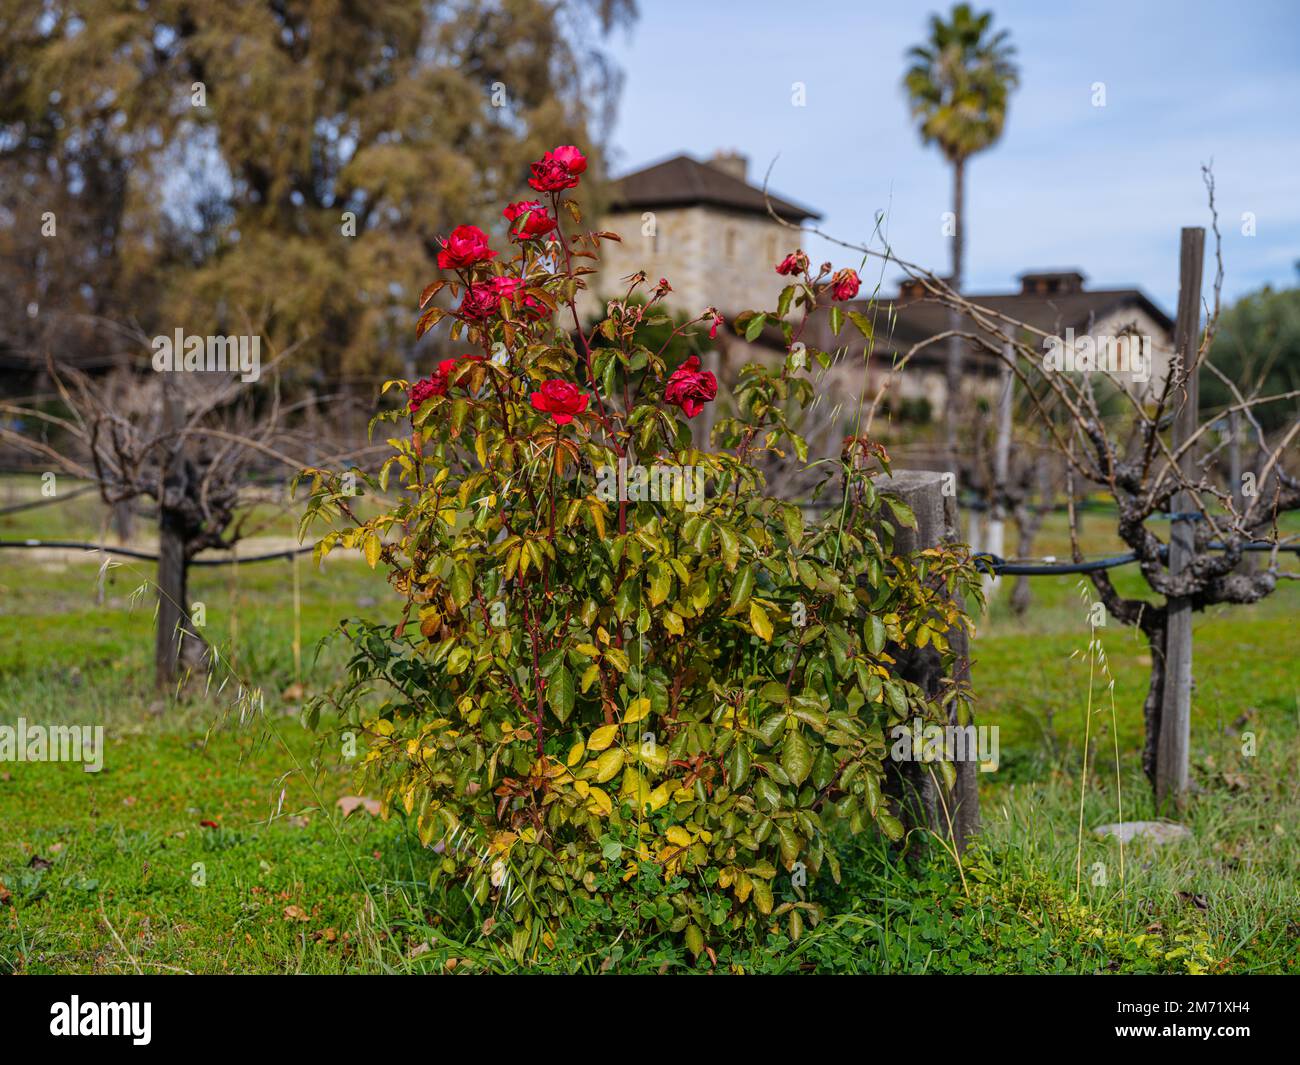 A faint hint of colour is provided by fading red roses on a winter's day in the vineyards of Napa Valley. Stock Photo